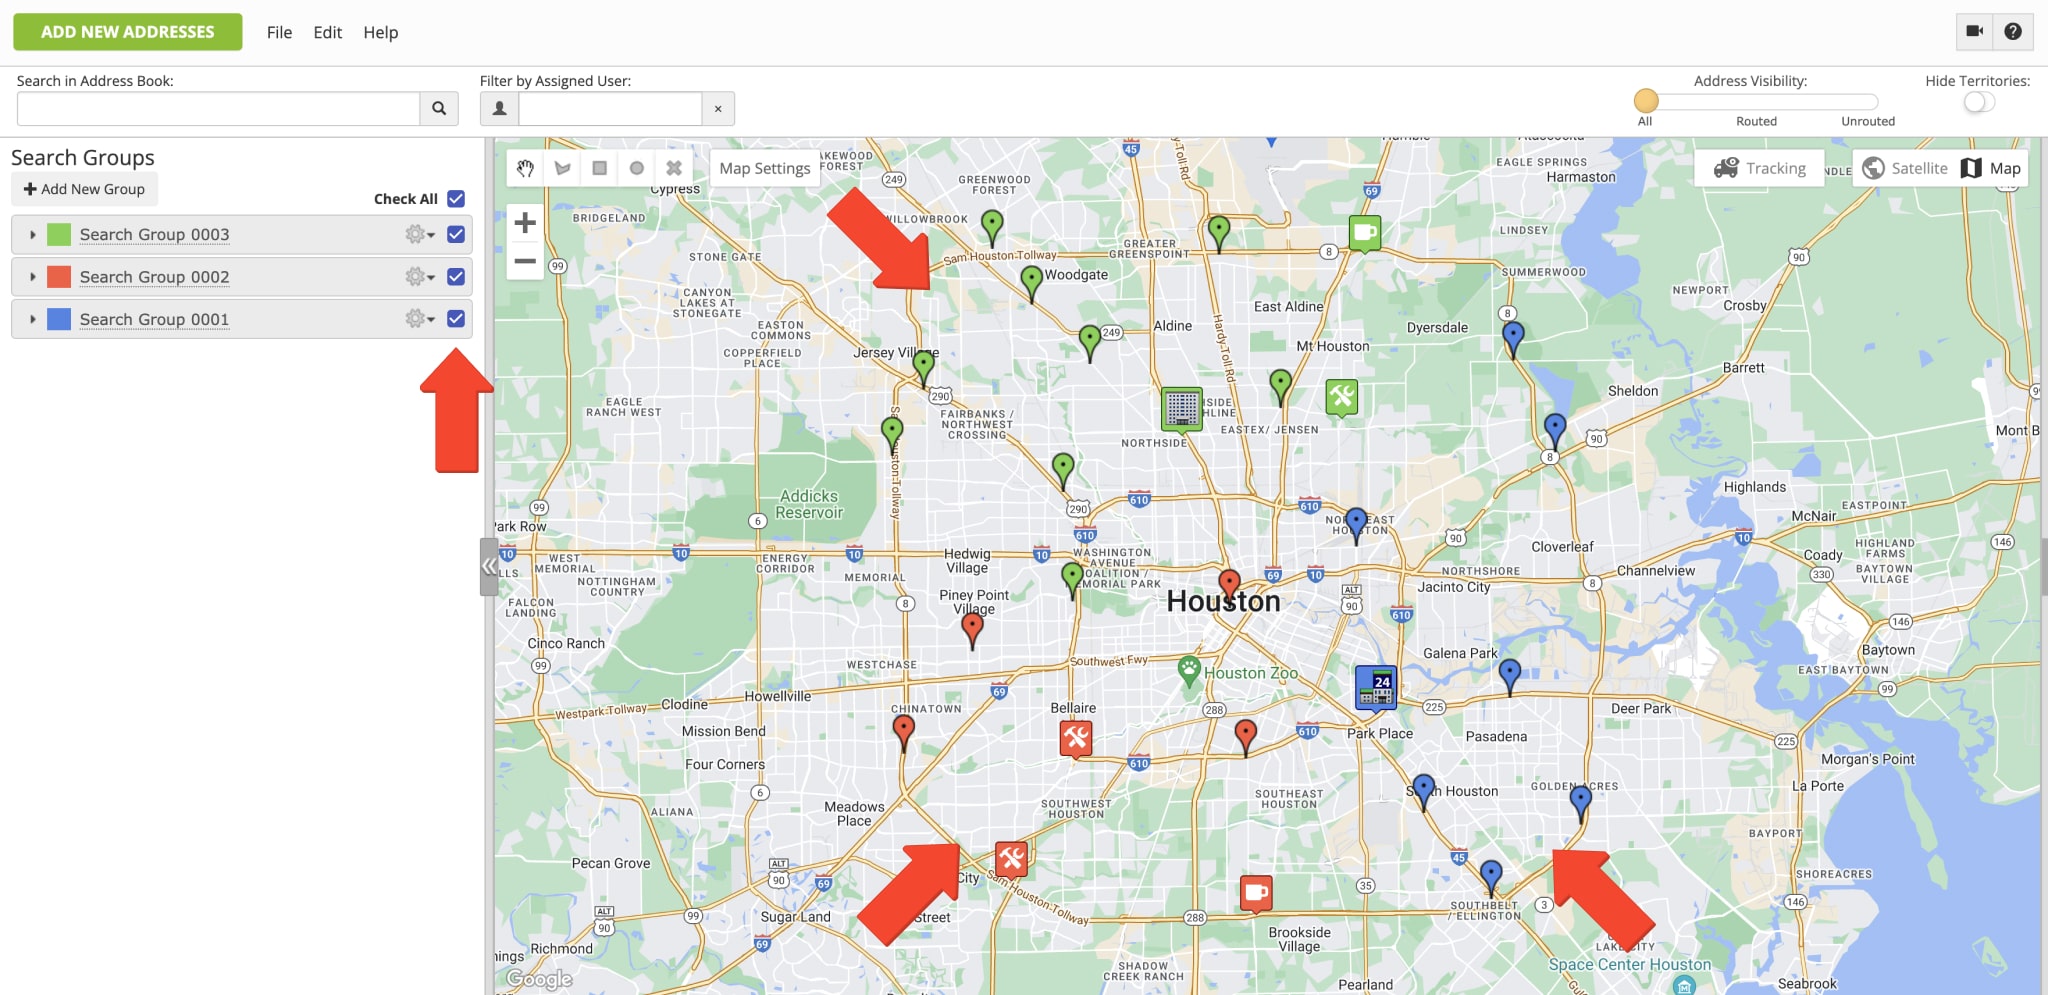 Select Search Groups to filter addresses on the Address Book Map by location, order, customer, and custom attributes.